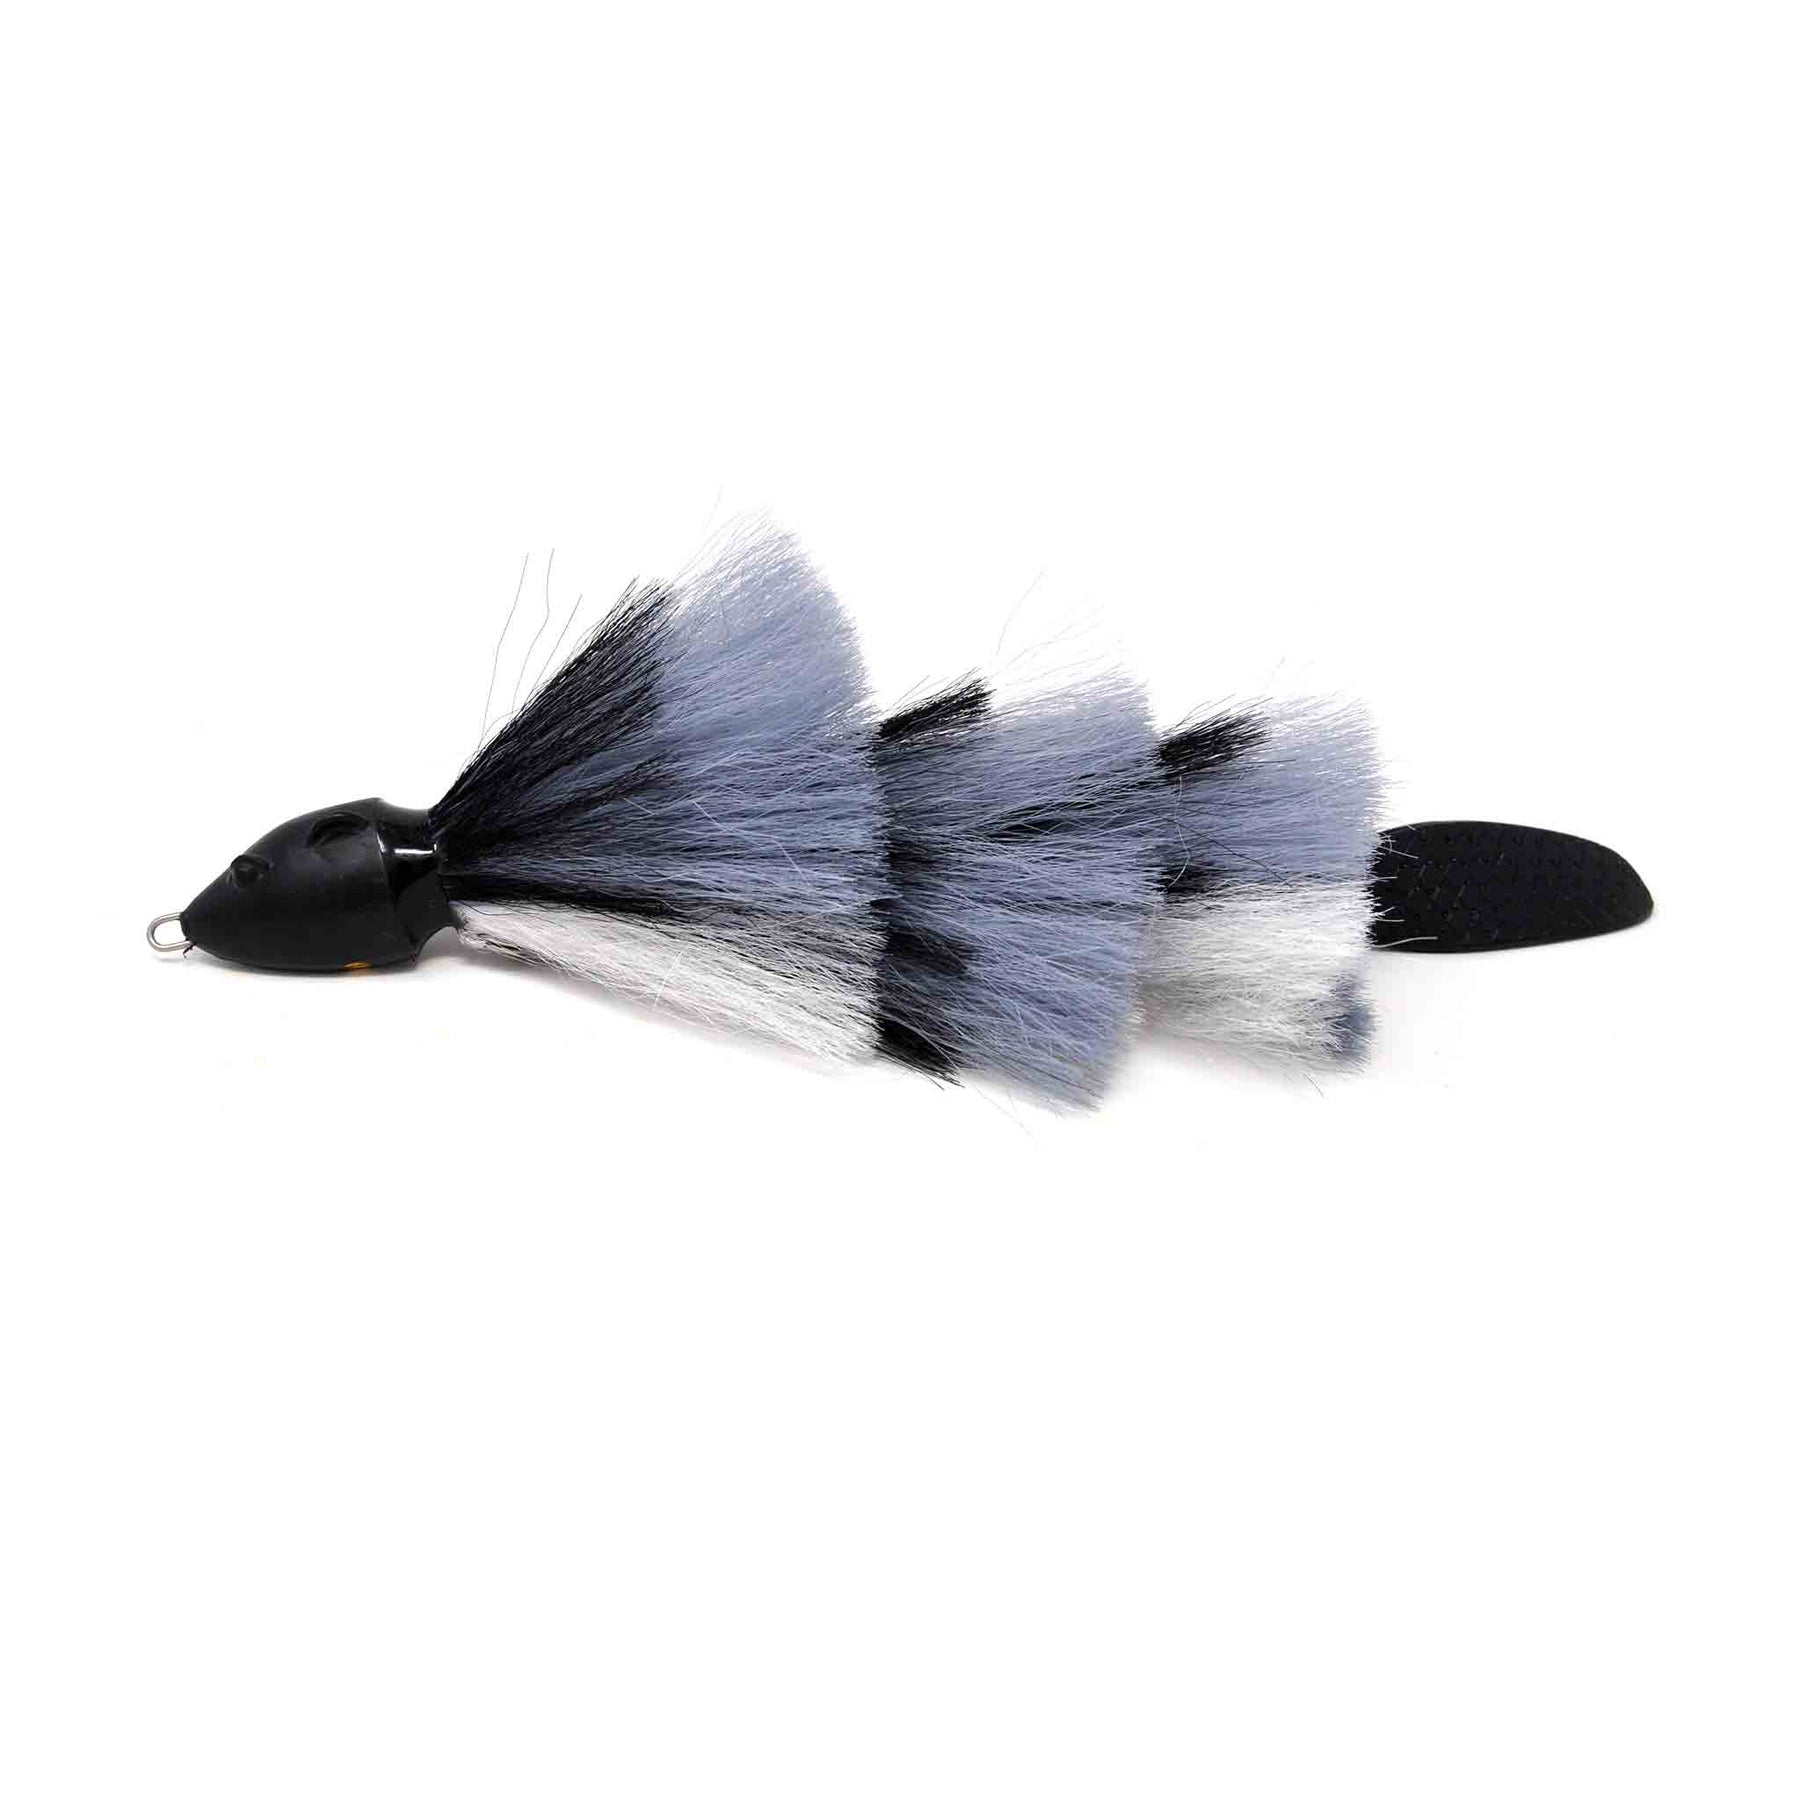 View of Jerk-Glide_Baits Beaver's Baits Mini Beaver Jerkbait Grey Ghost available at EZOKO Pike and Musky Shop